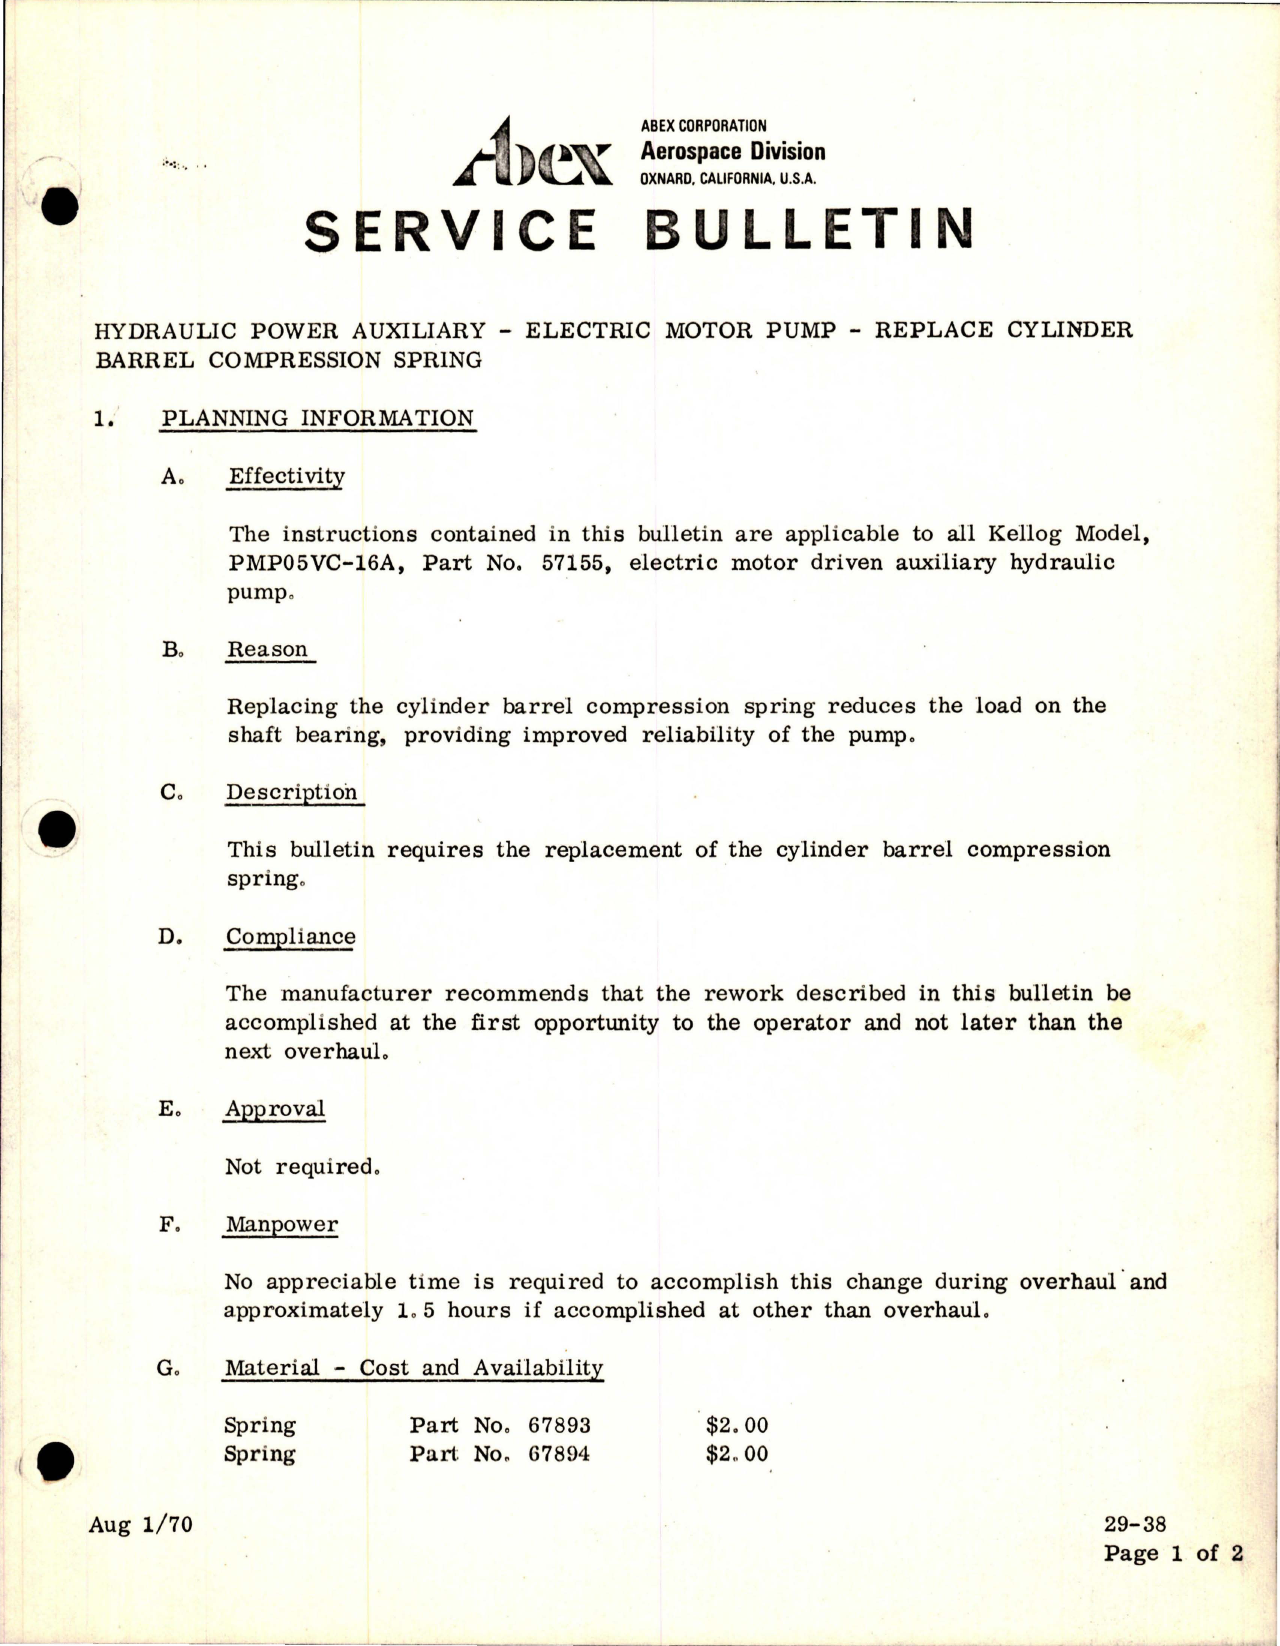 Sample page 1 from AirCorps Library document: Abex Hydraulic Power Auxiliary - Electric Motor Pump - Replace Cylinder Barrel Compression Spring